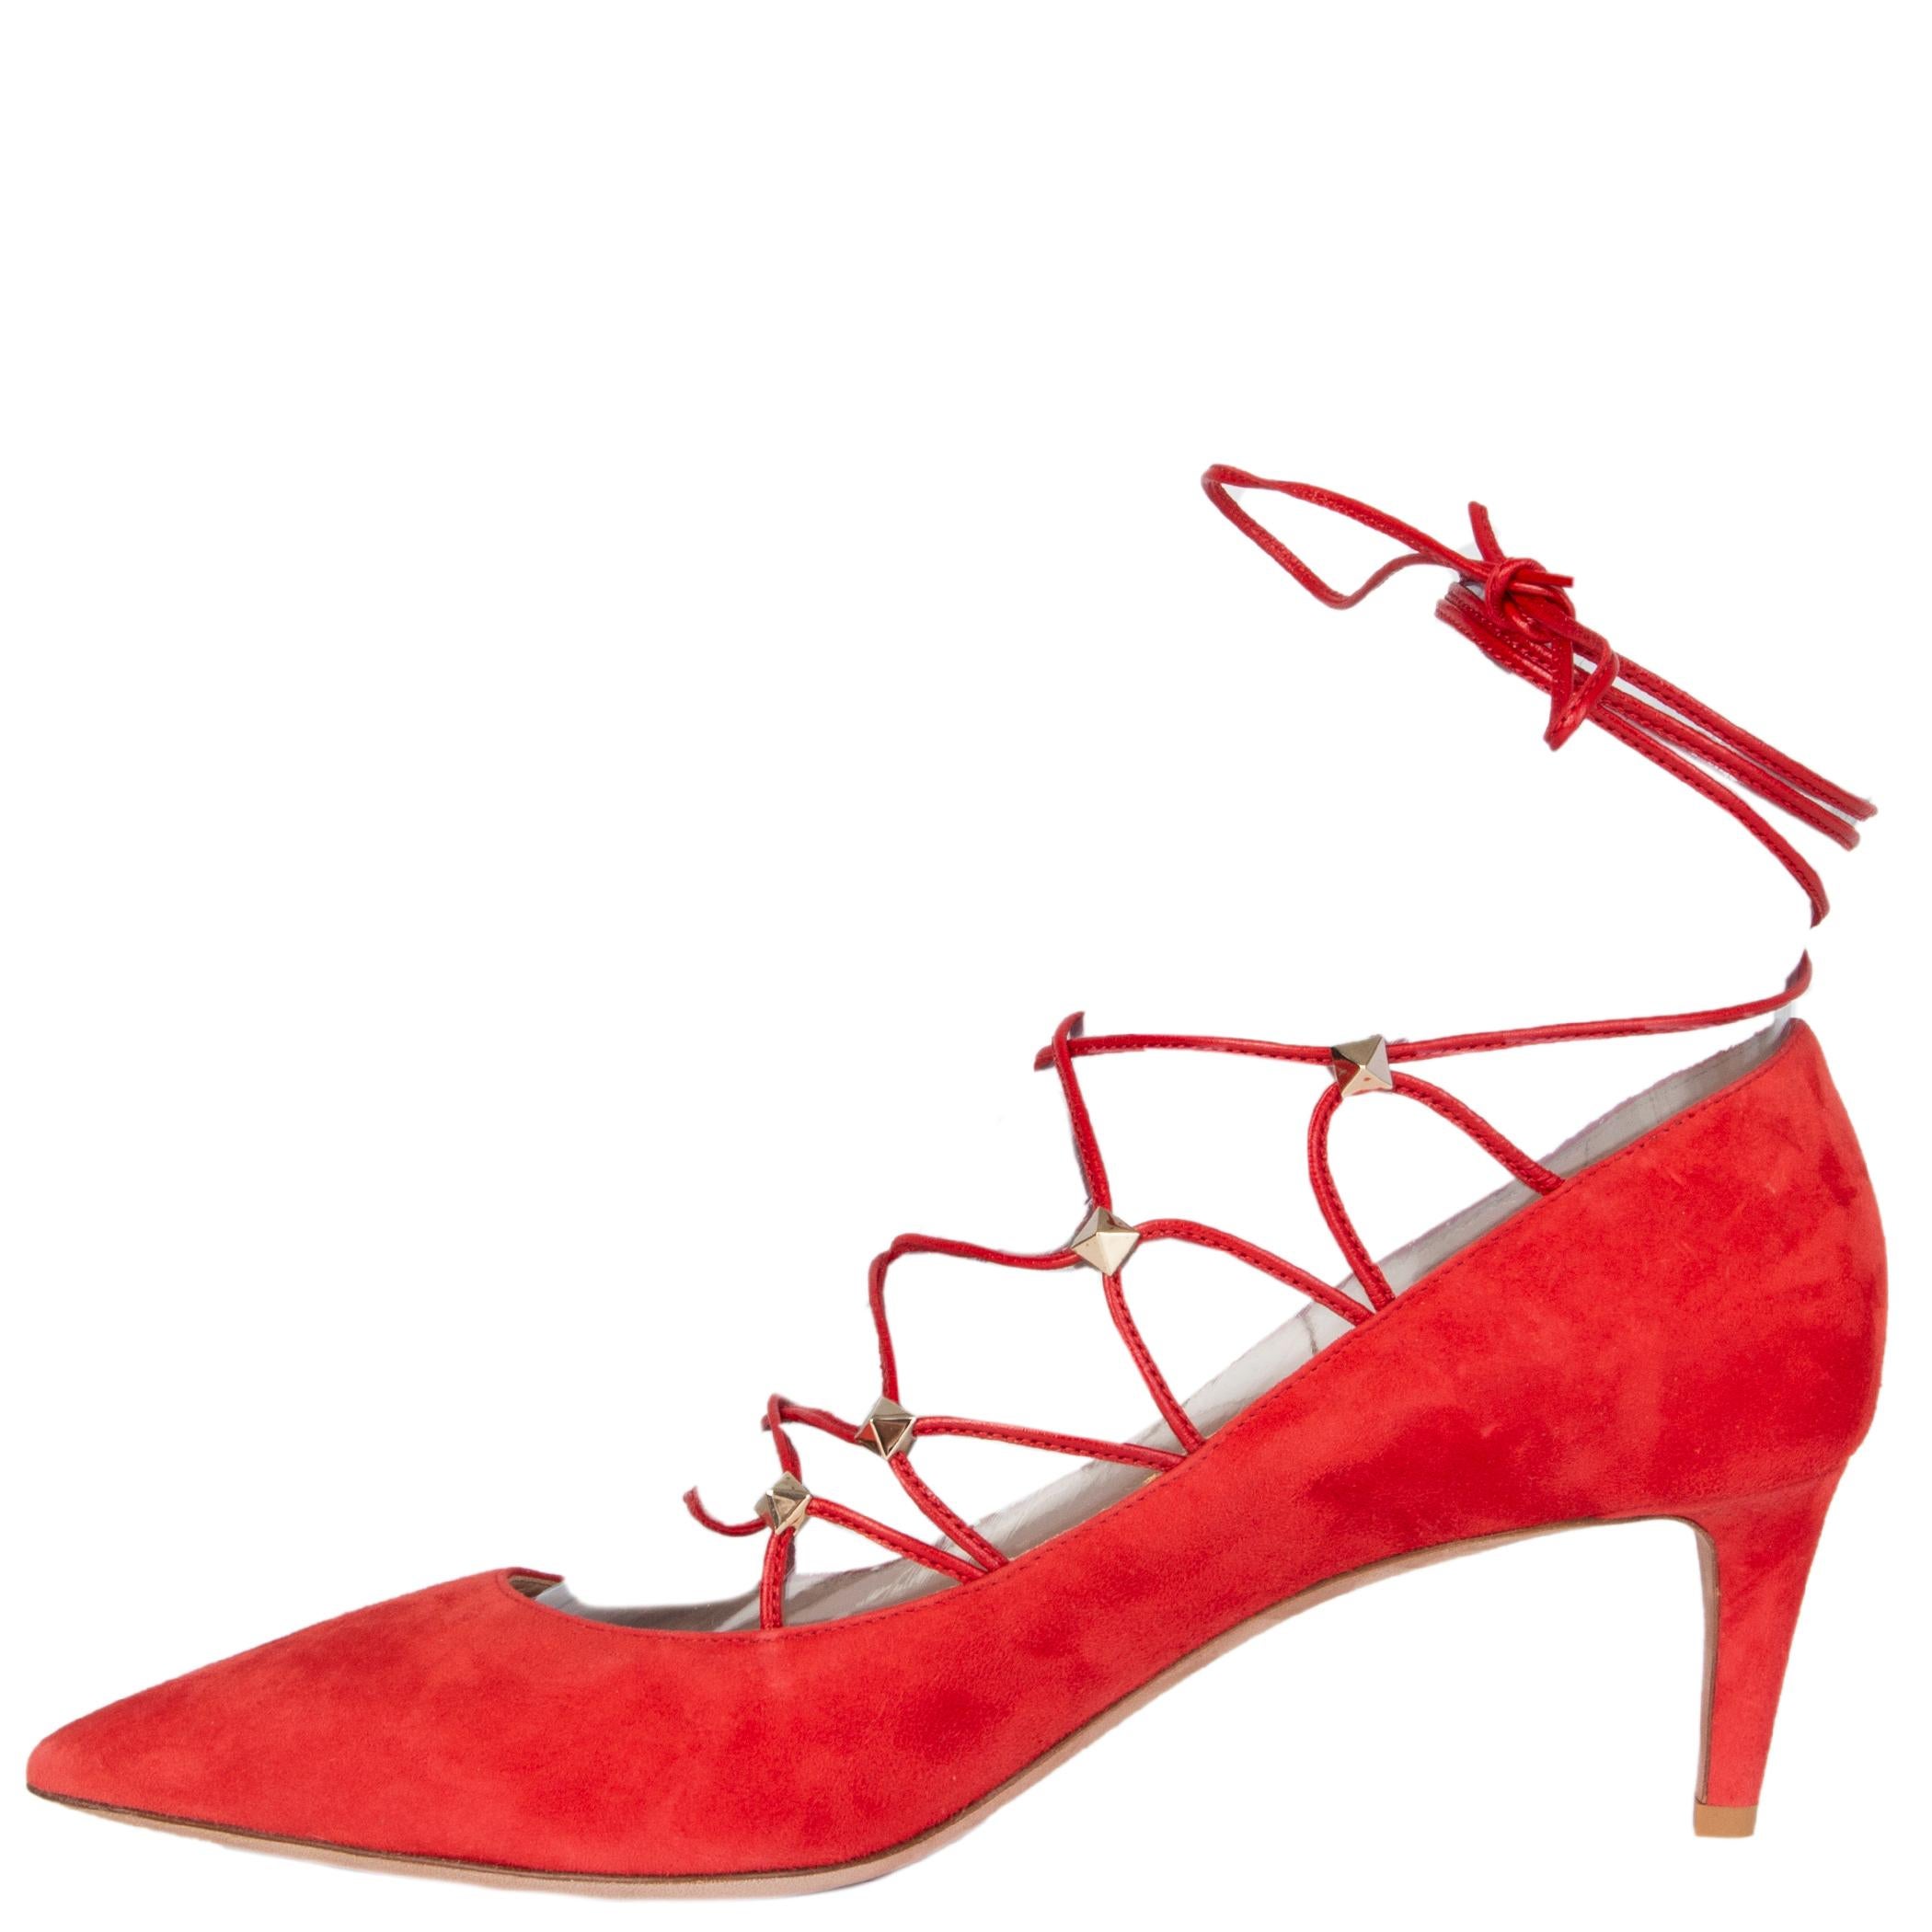 Red VALENTINO red suede ROCKSTUD Lace-Up Pumps Shoes 39.5 For Sale